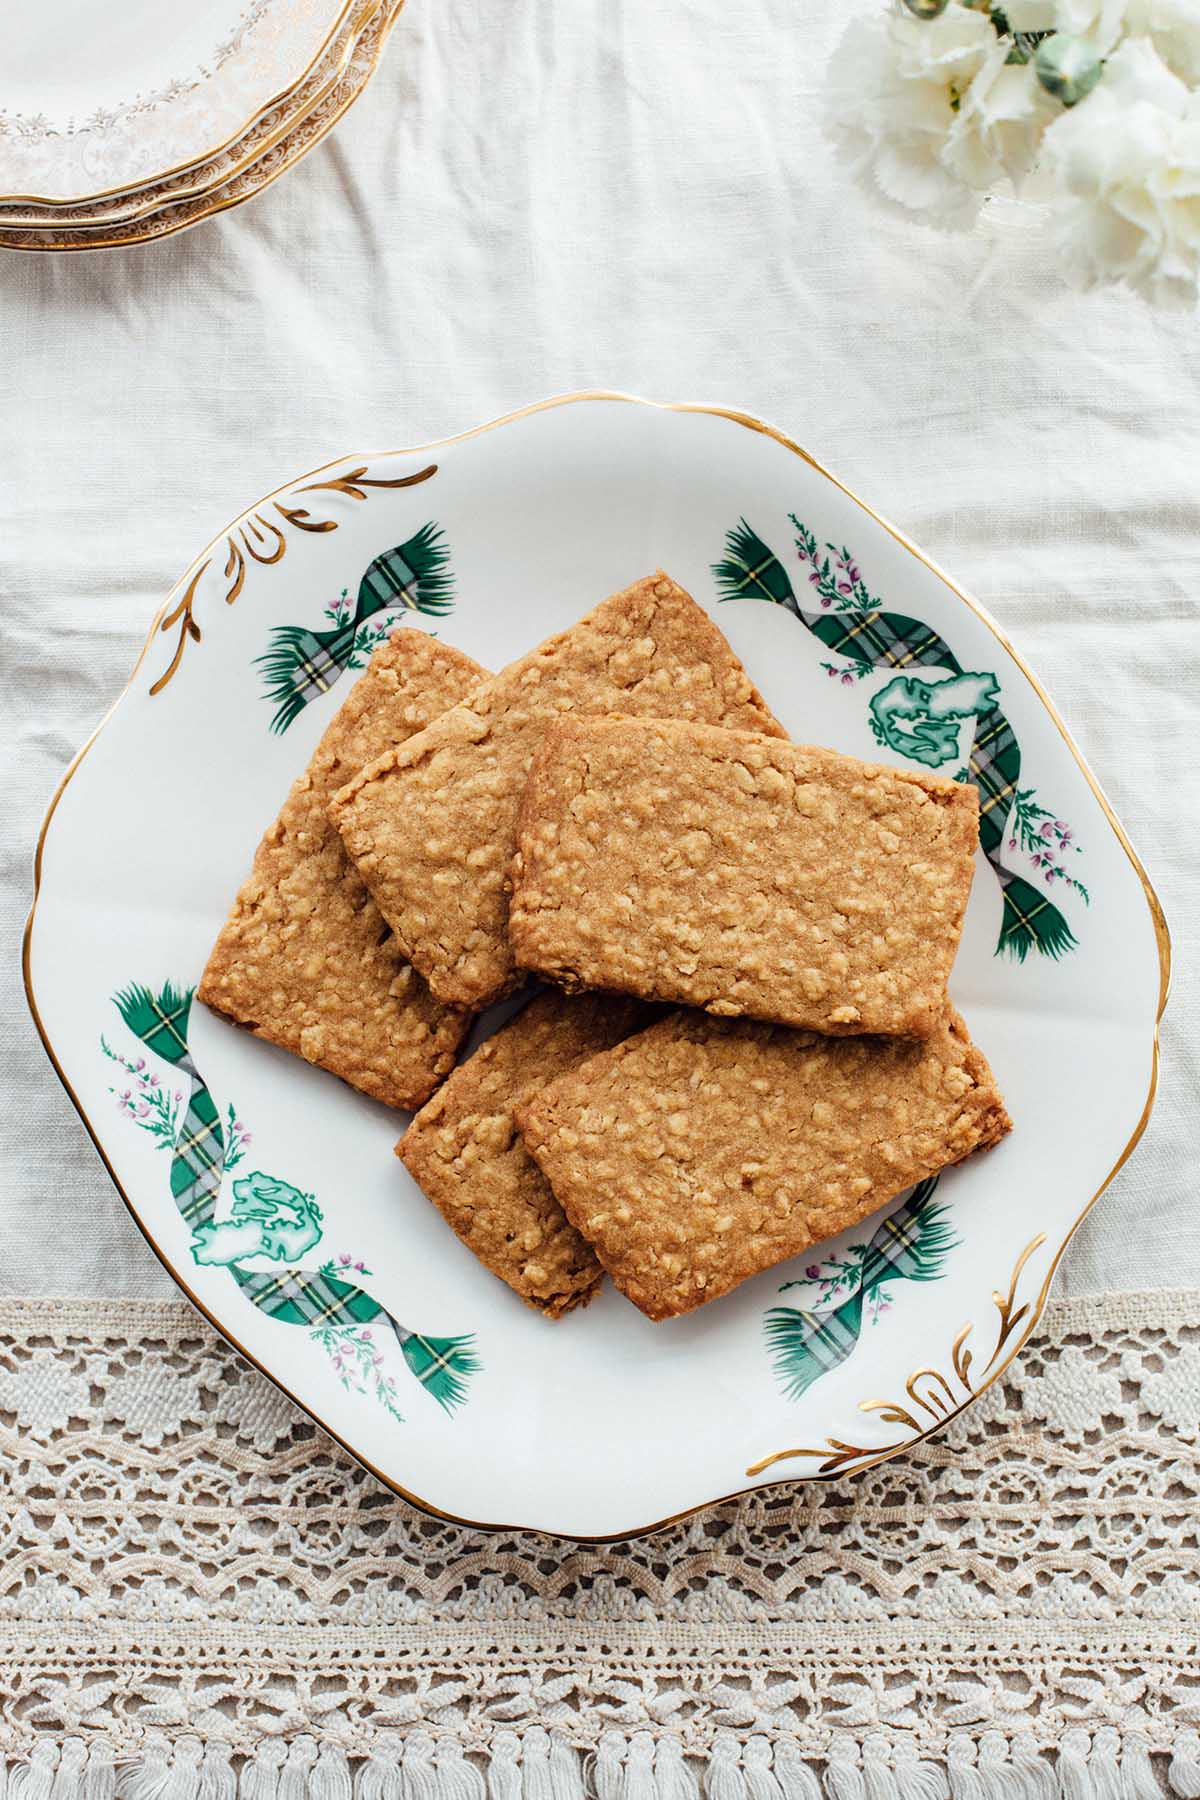 A platter of Nova Scotia oatcakes on a table with plates and a vase of white flowers.